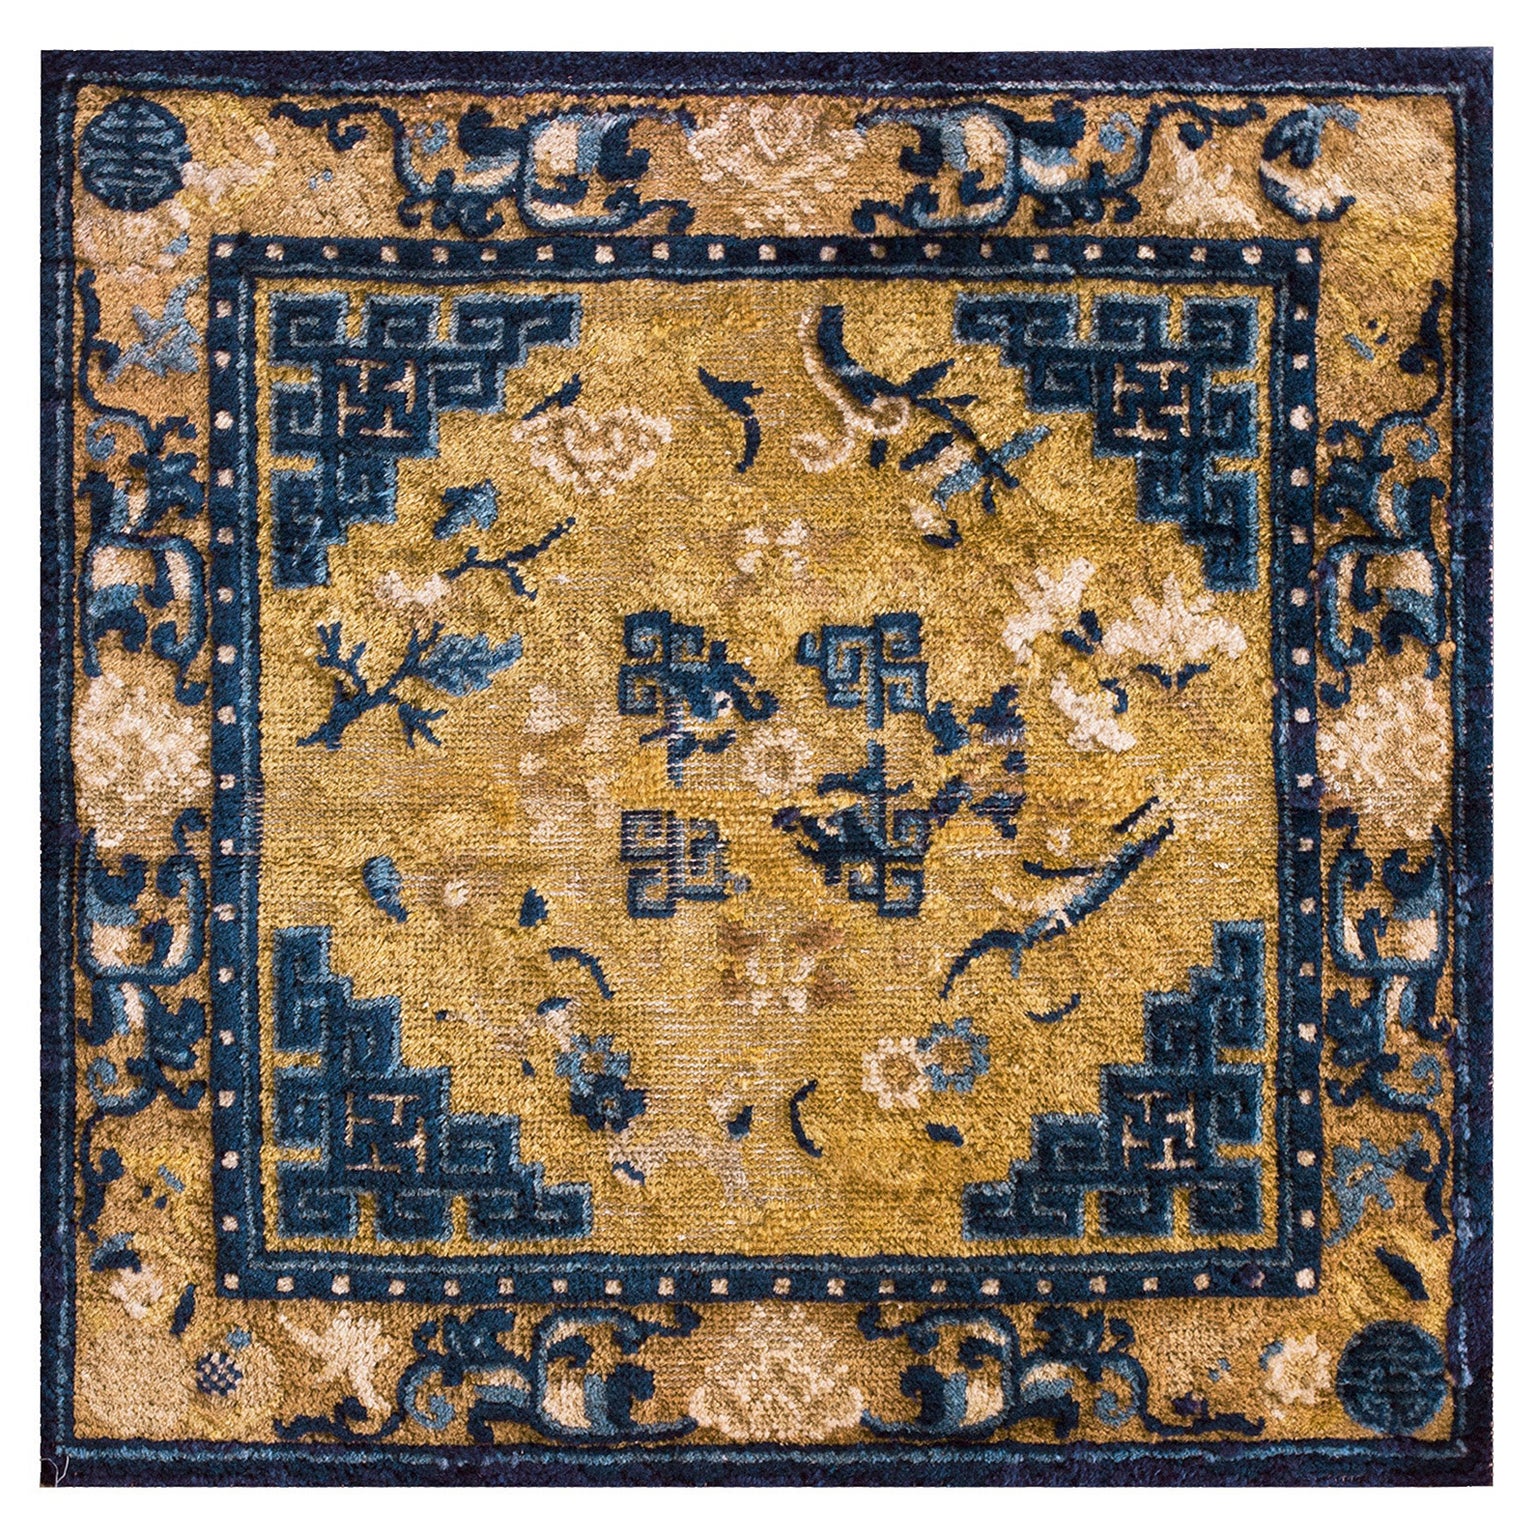 1840s Chinese and East Asian Rugs